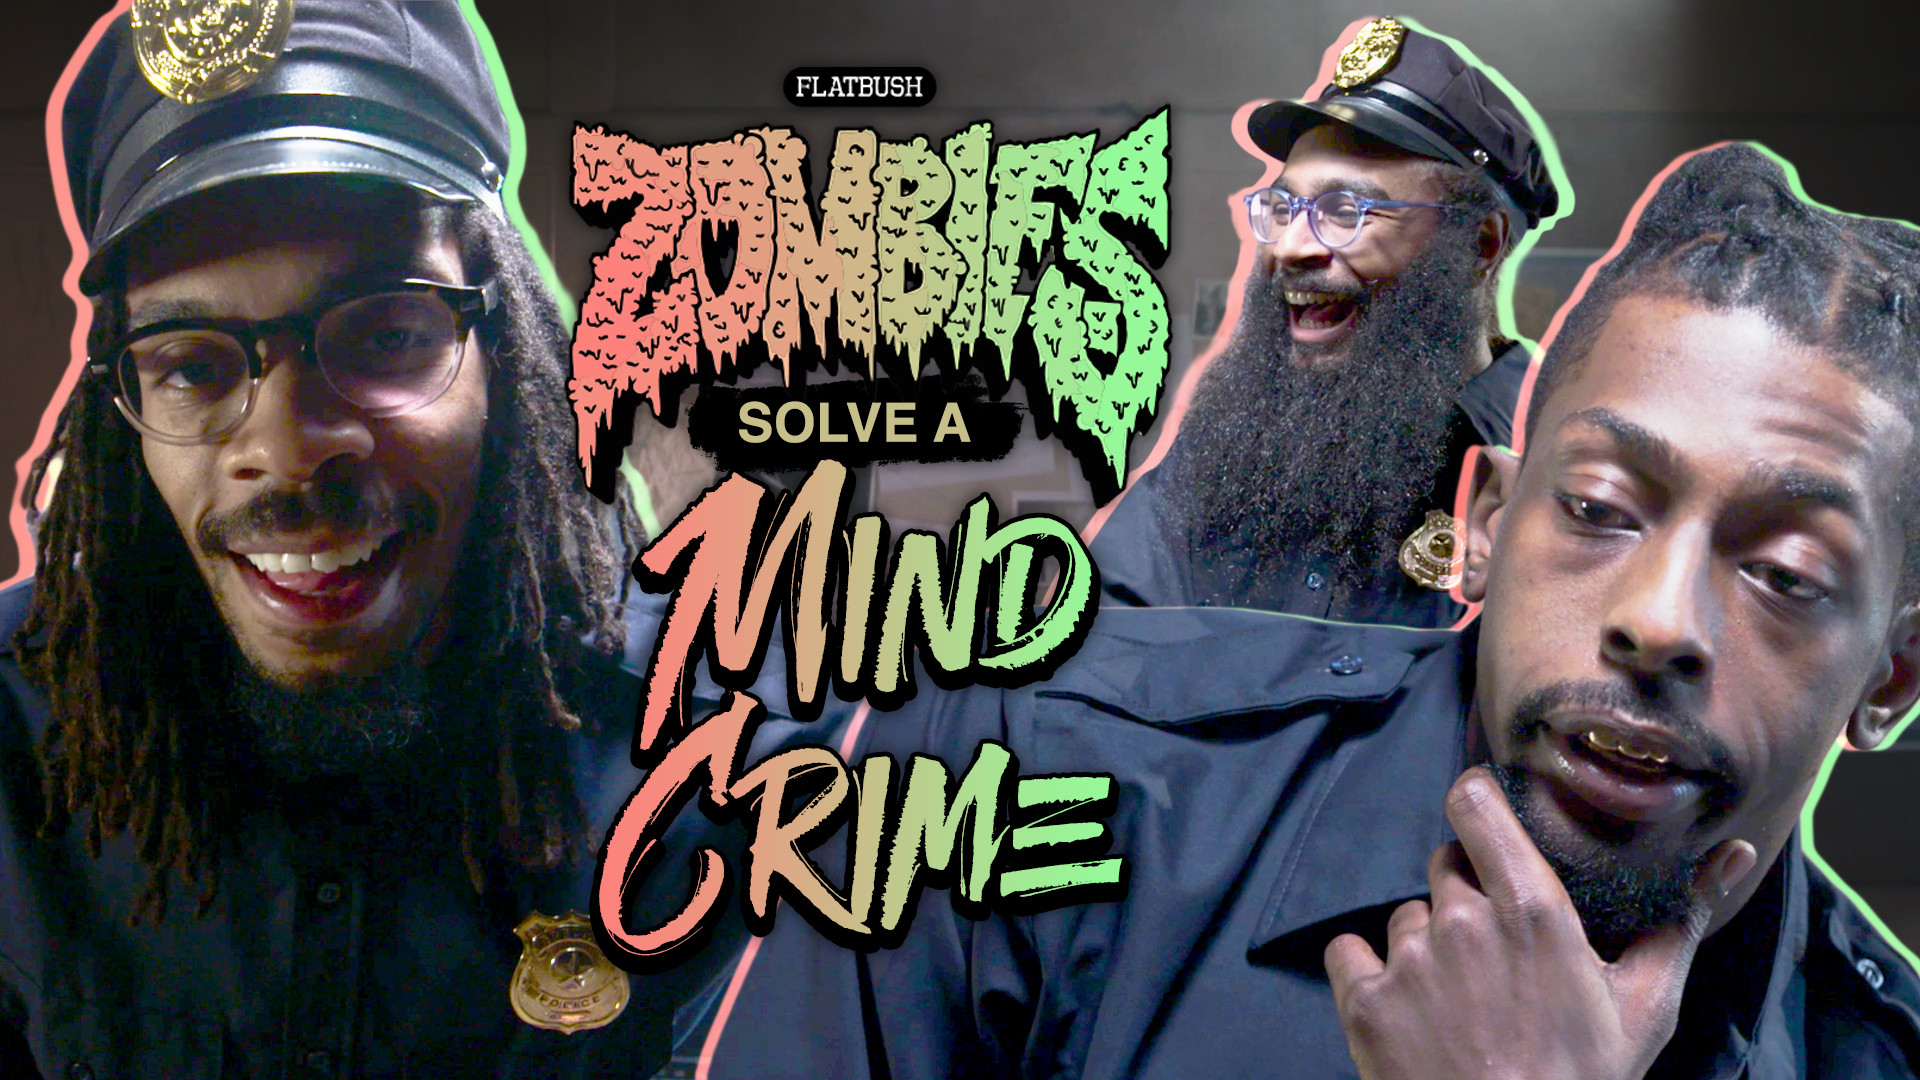 1920x1080 Watch Flatbush Zombies Solve A Mind Crime In A Surreal Comedy Sketch -  Stereogum